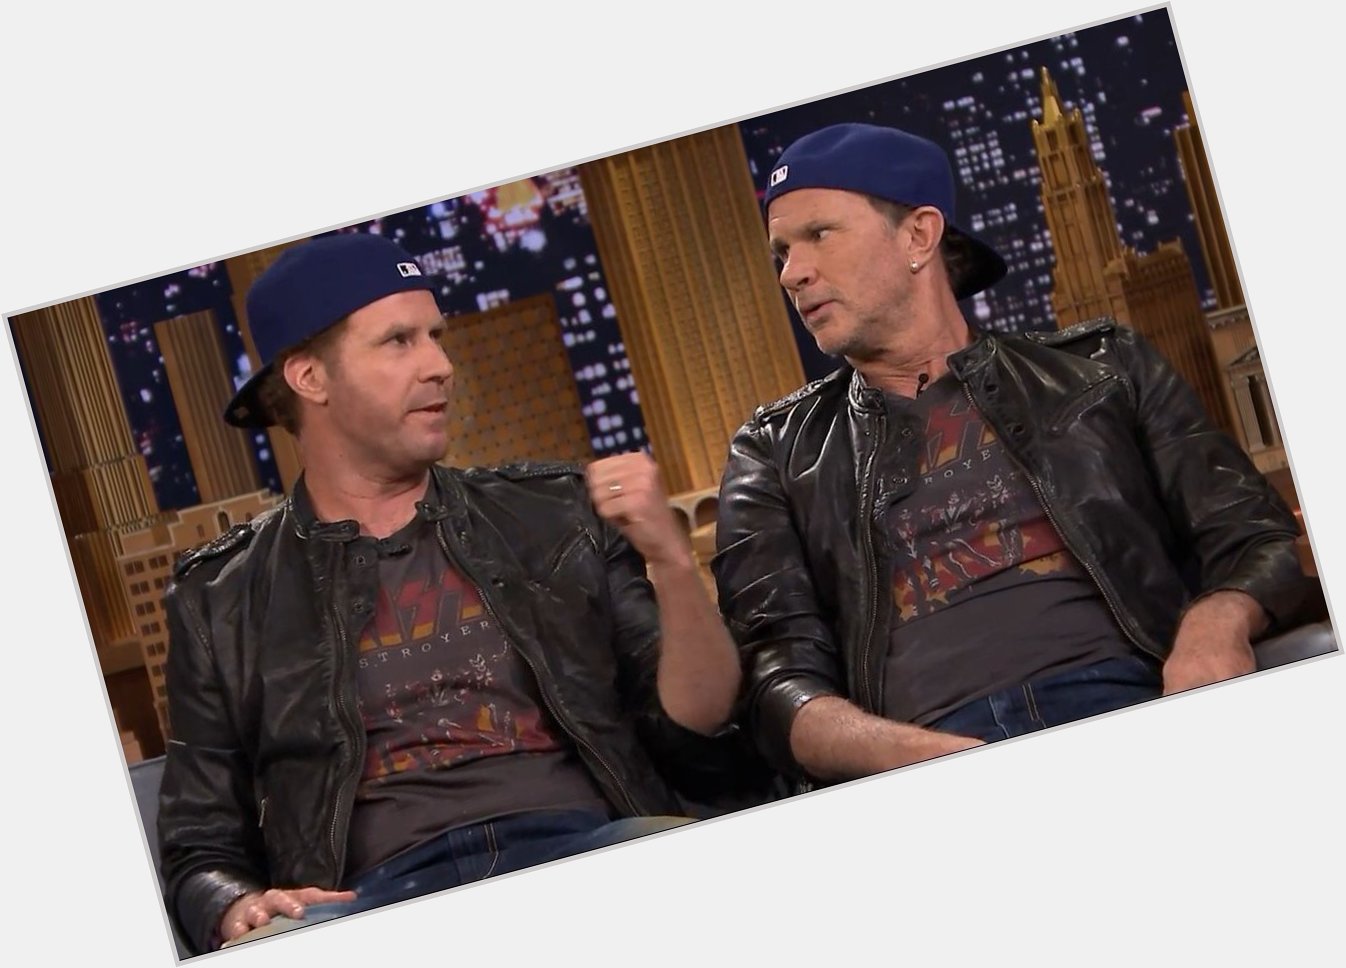 Happy Birthday Will Ferrell of CHICKENFOOT and RED HOT CHILI PEPPERS!
Err..wait.
Chad Smith. I meant Chad Smith. 